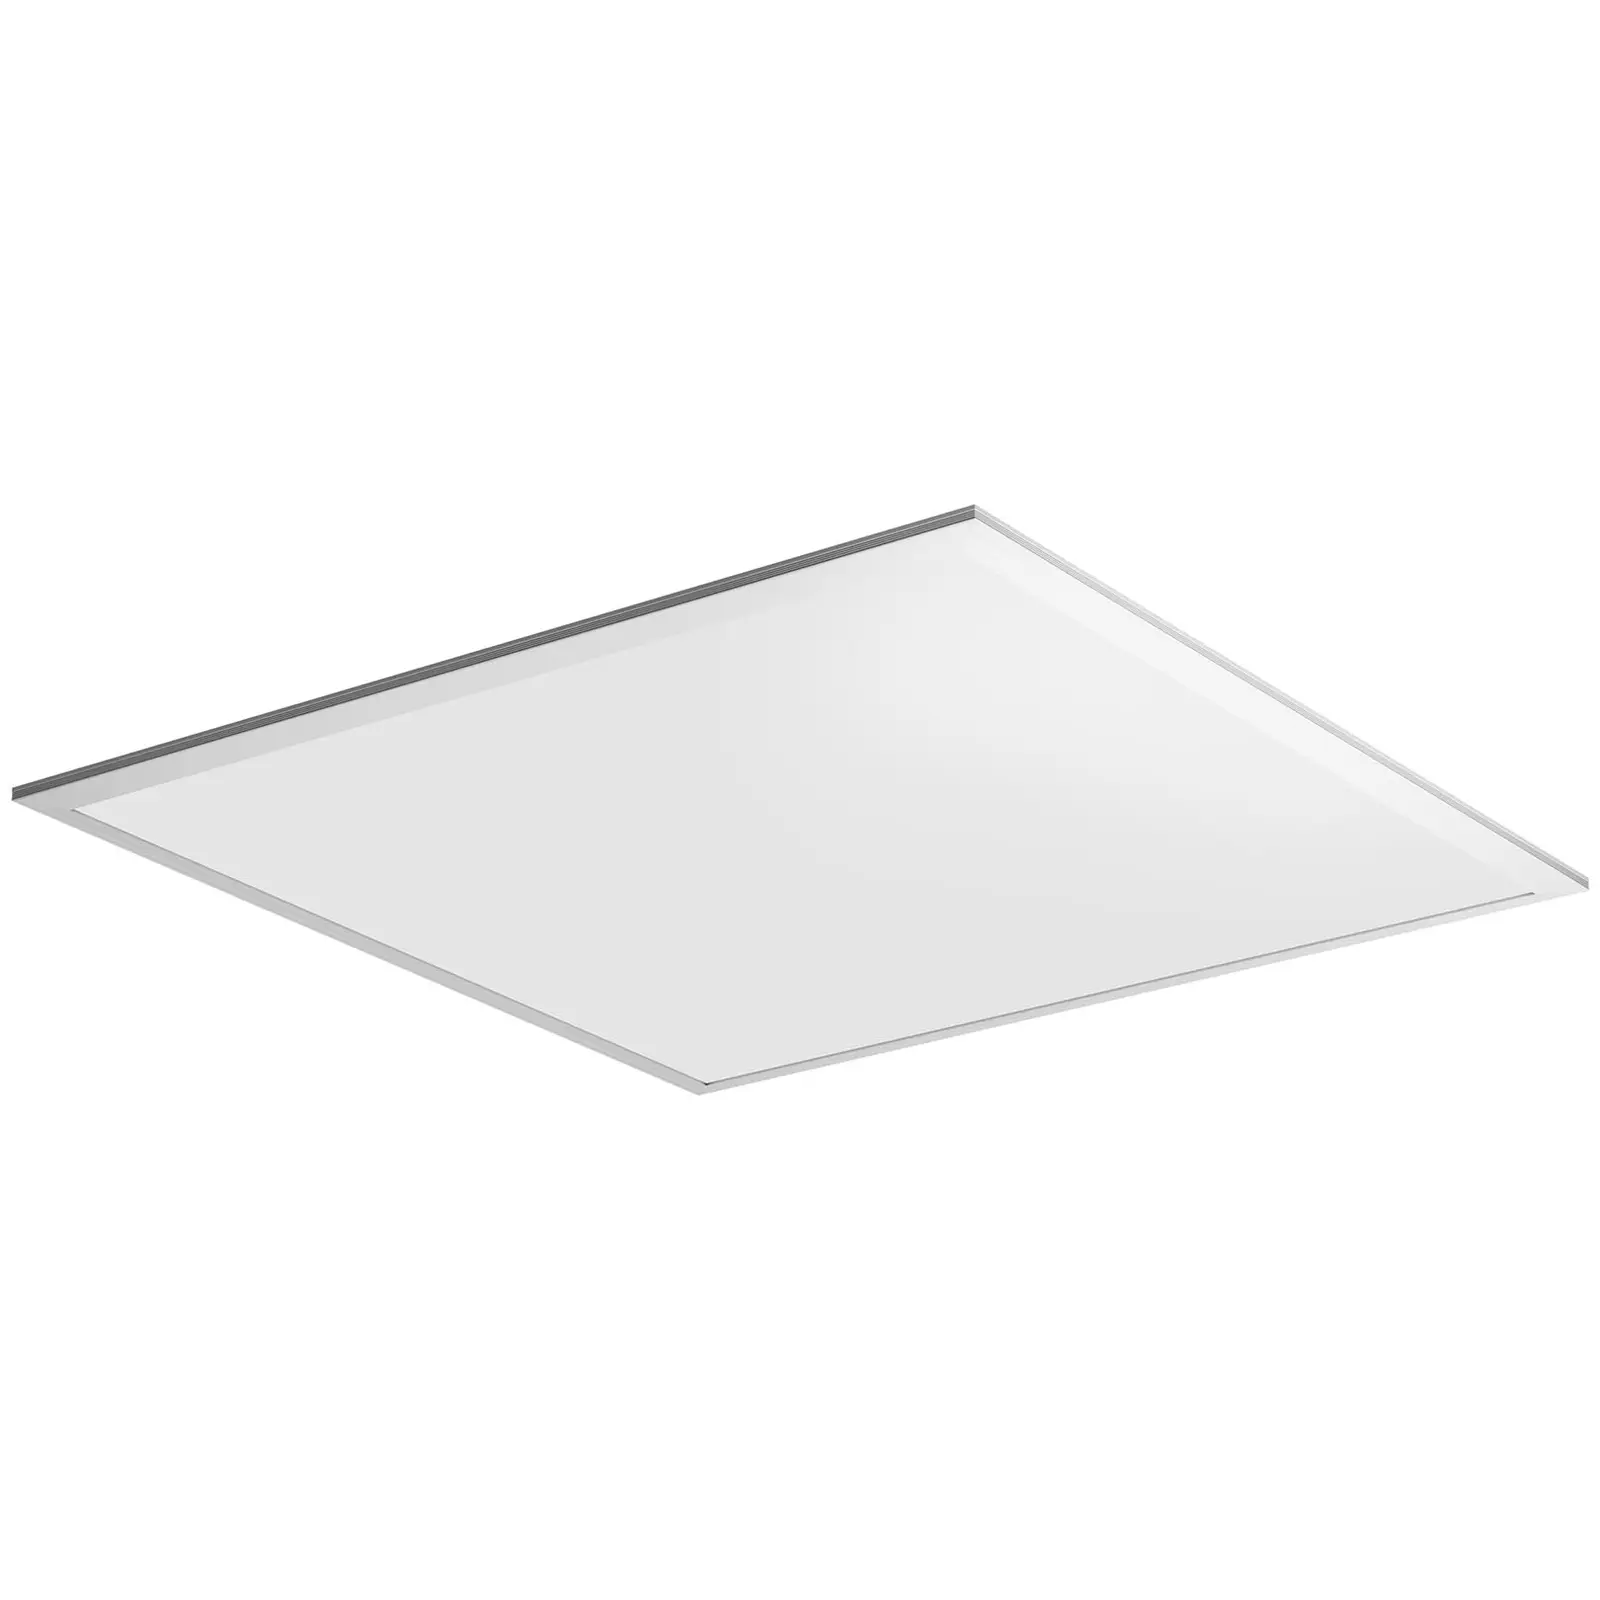 Factory second LED Ceiling Panel - 62 x 62 cm - 48 W - 4,560 lm - 5,700 K